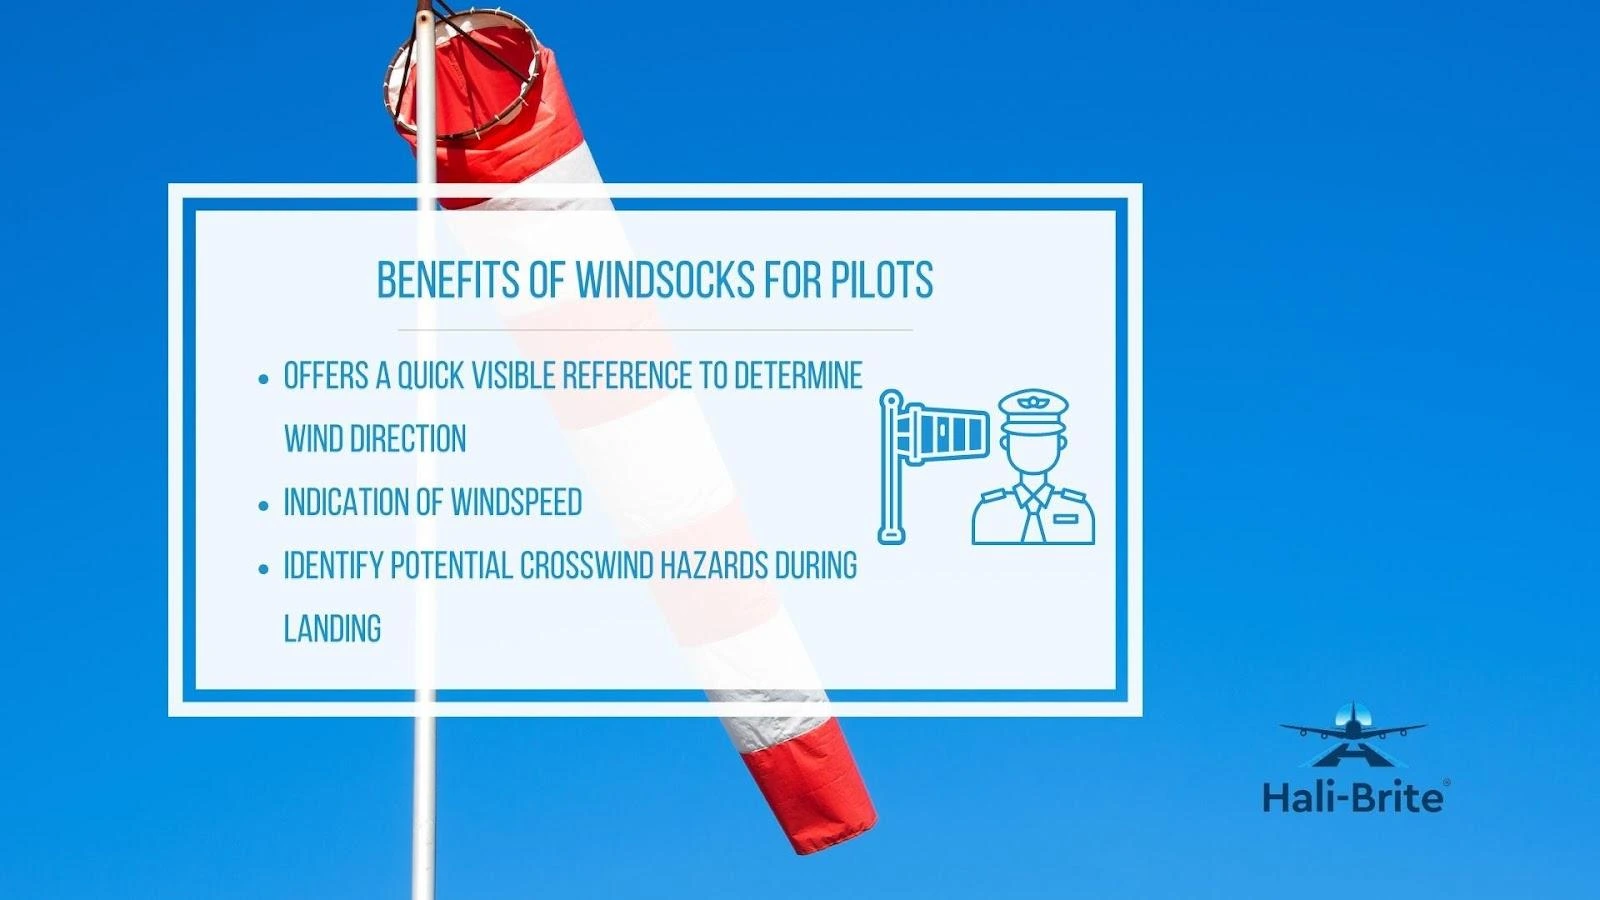 Infographic image of the benefits of winsocks for pilots